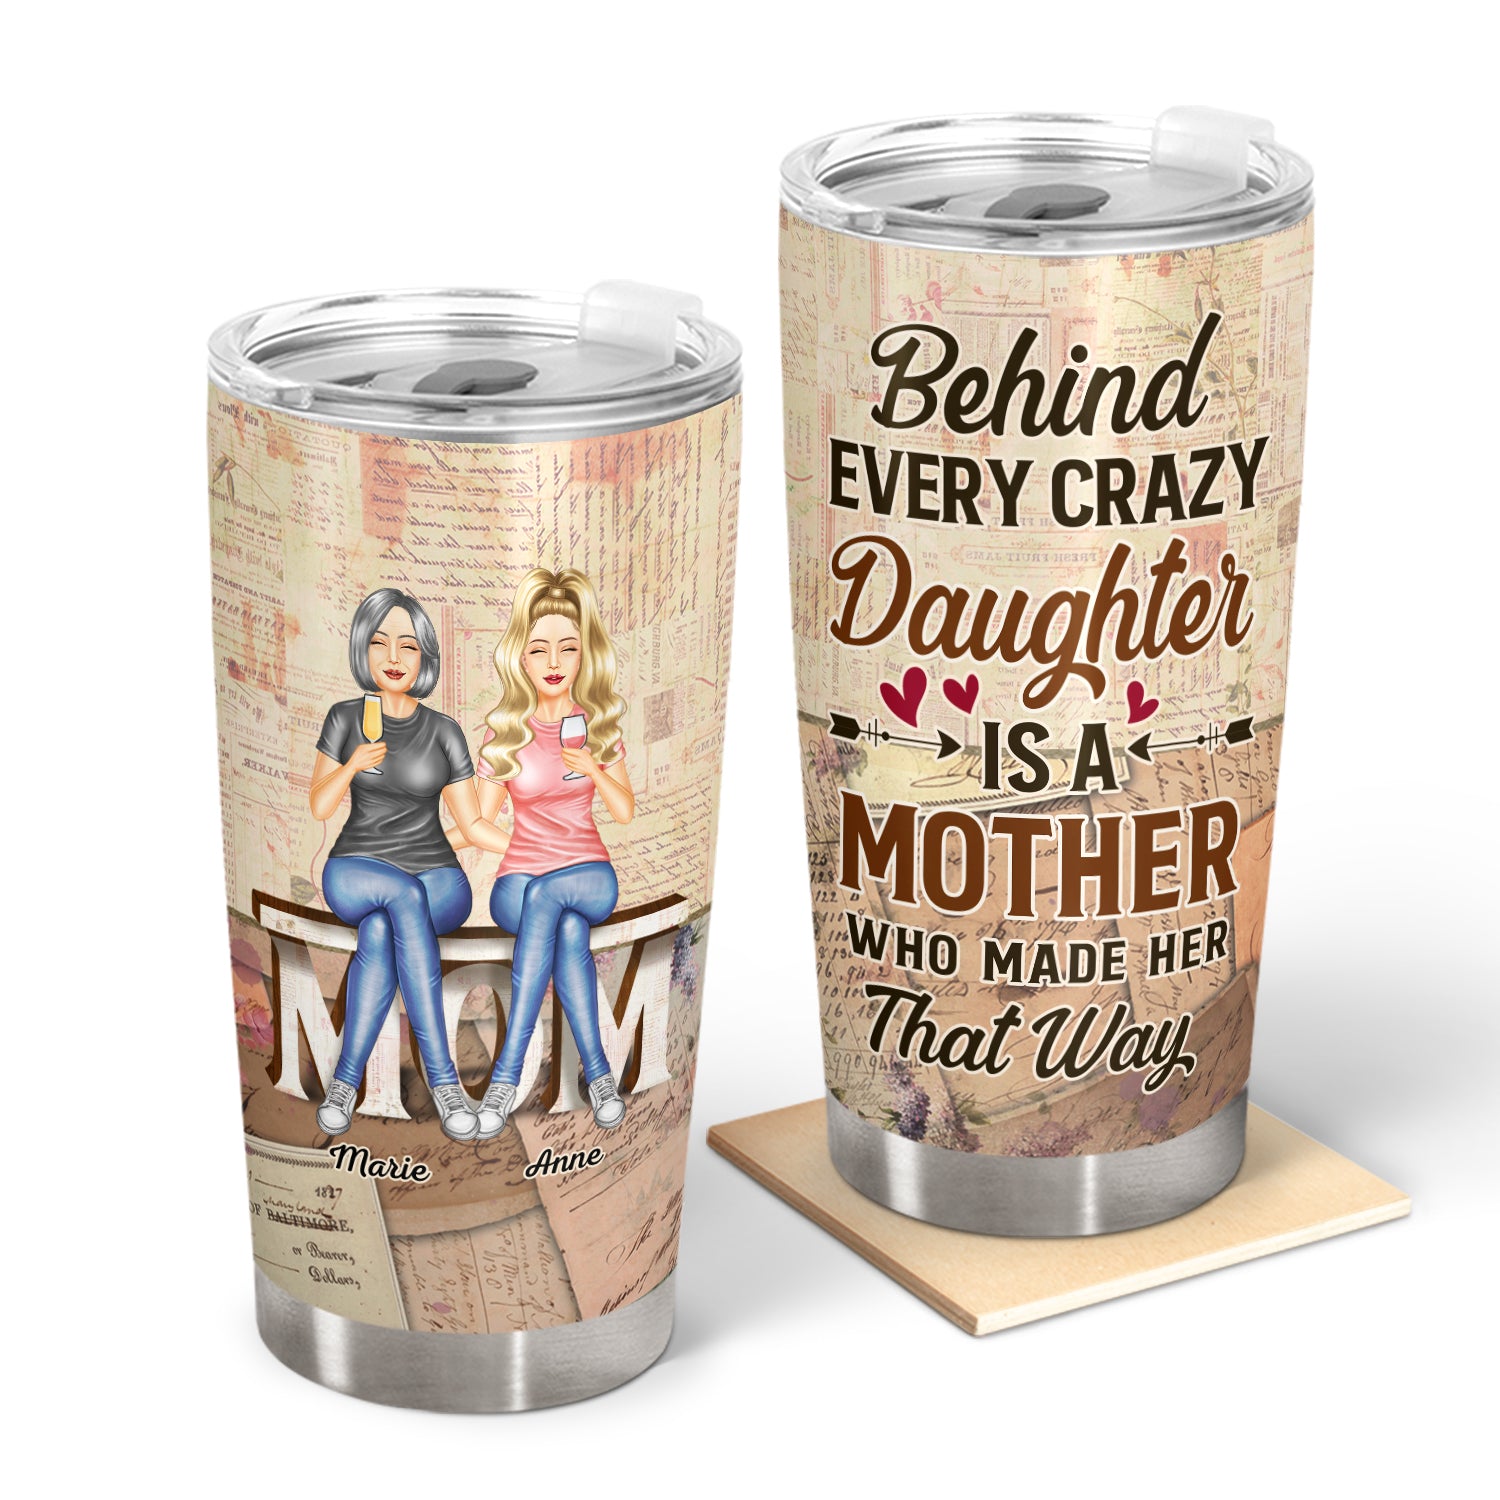 Behind Every Crazy Daughter Is A Mother - Birthday, Loving Gift For Mom, Grandma, Grandmother - Personalized Custom Tumbler